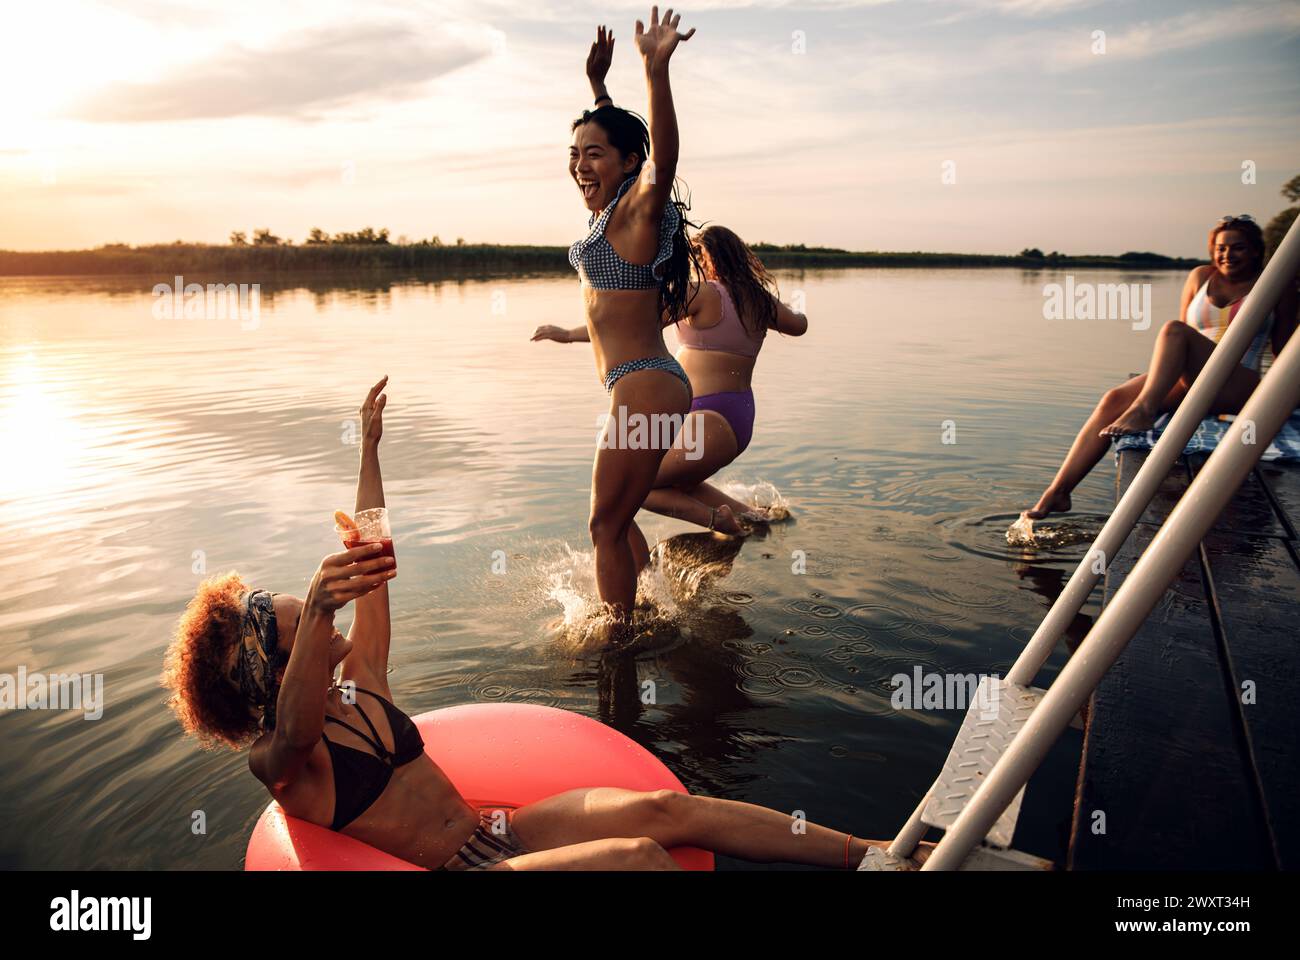 Group of female friends enjoying a summer day jumping at the lake. Stock Photo